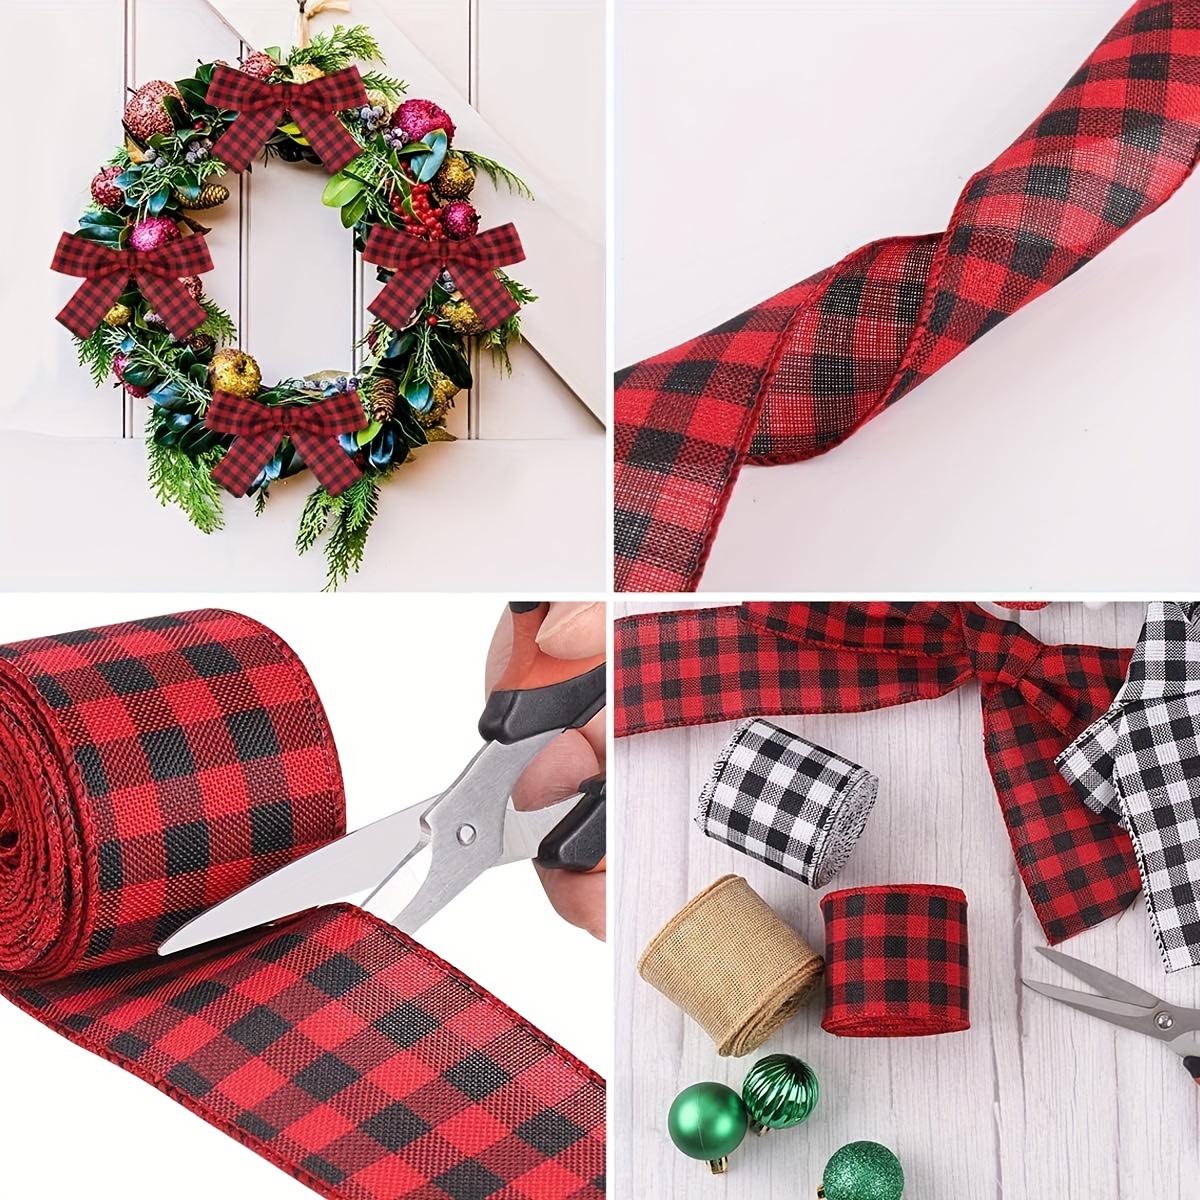 19.6 Yard 2.5 inch Wide Buffalo Plaid Ribbons Wired Edges, 2 Rolls Black  and White Checkered Ribbon for Christmas Tree Gift Decorations